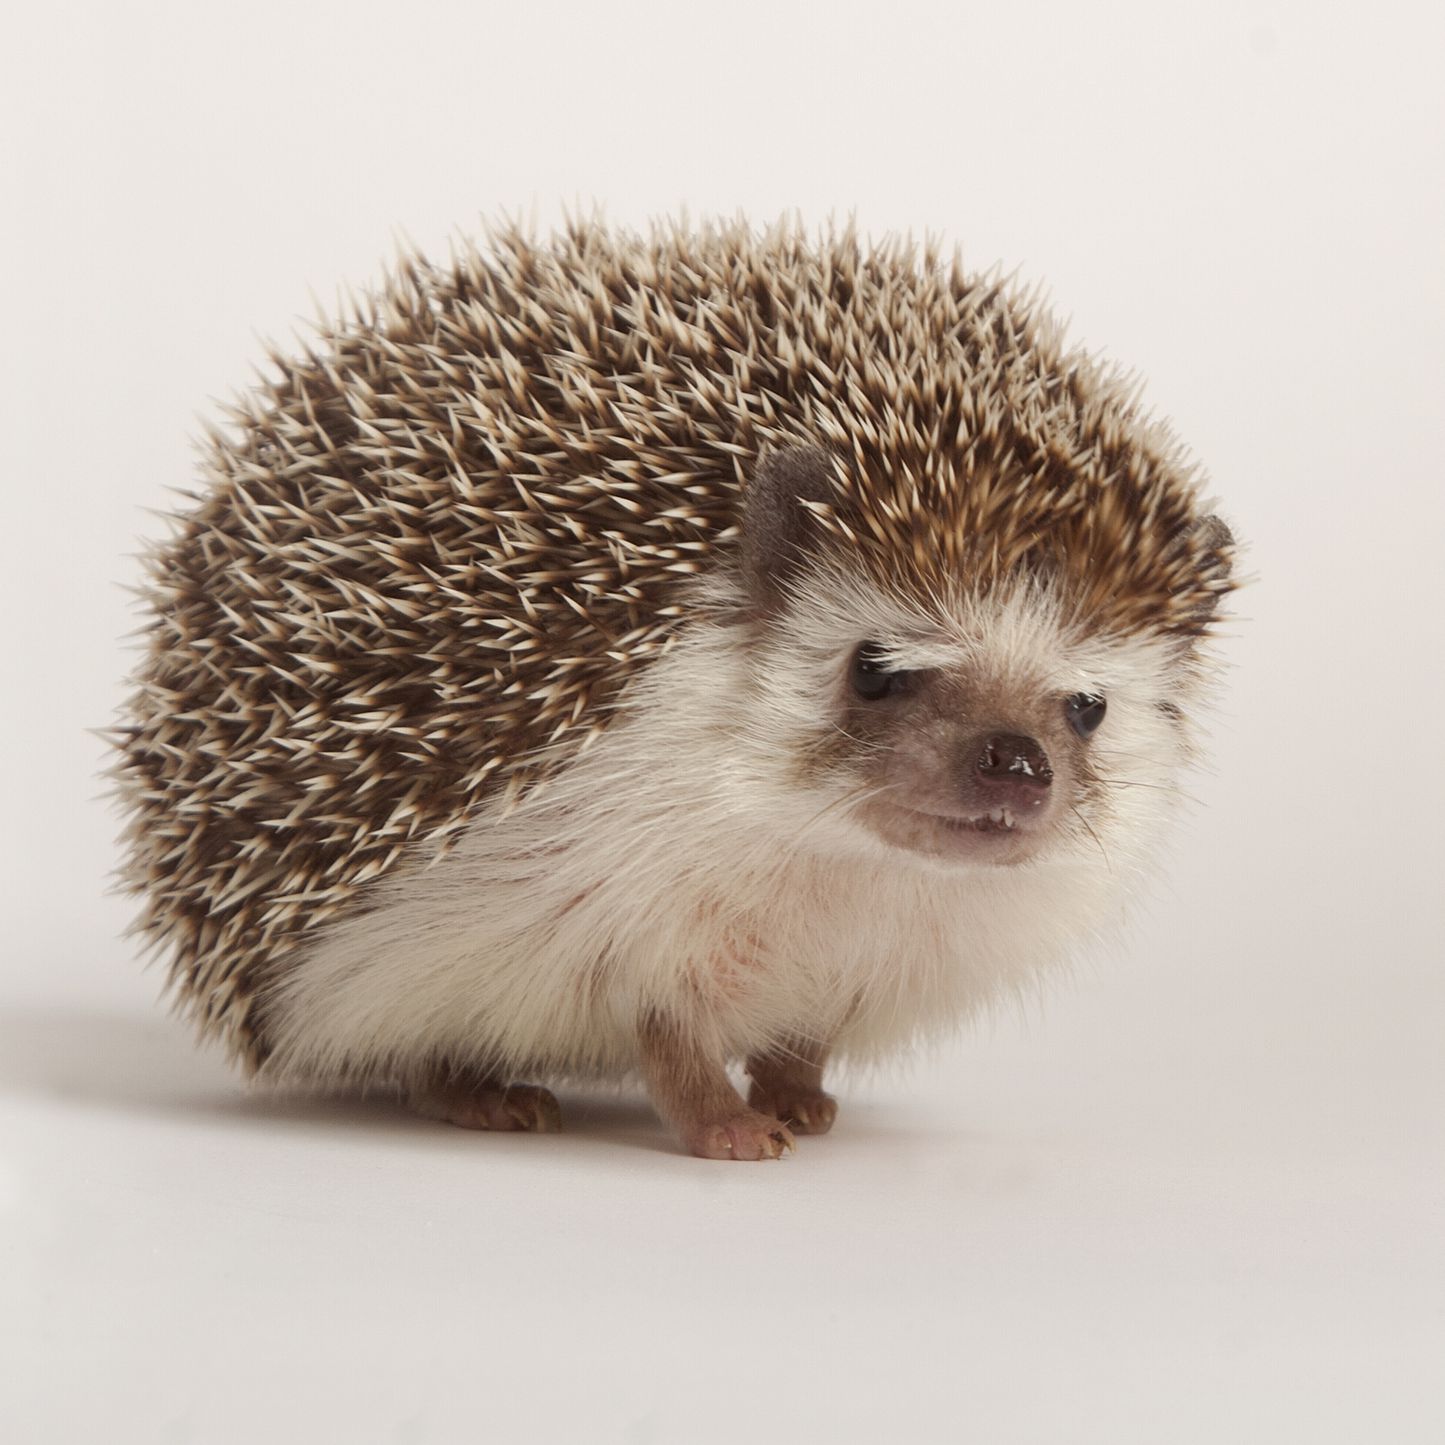 What is the best way to house a health Hedgehog?